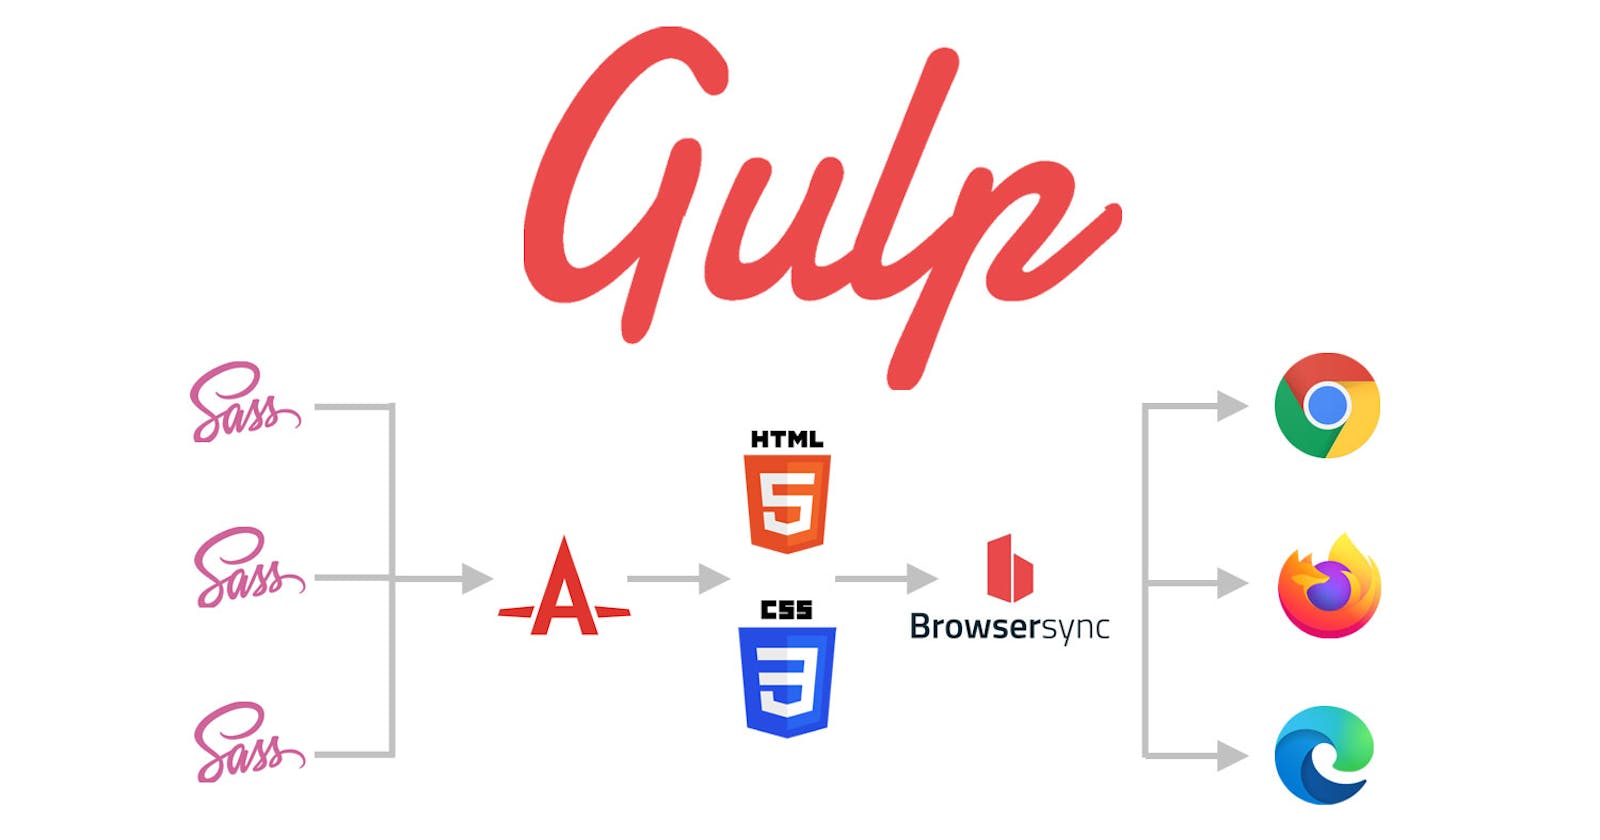 Your First Steps using Gulpjs 4